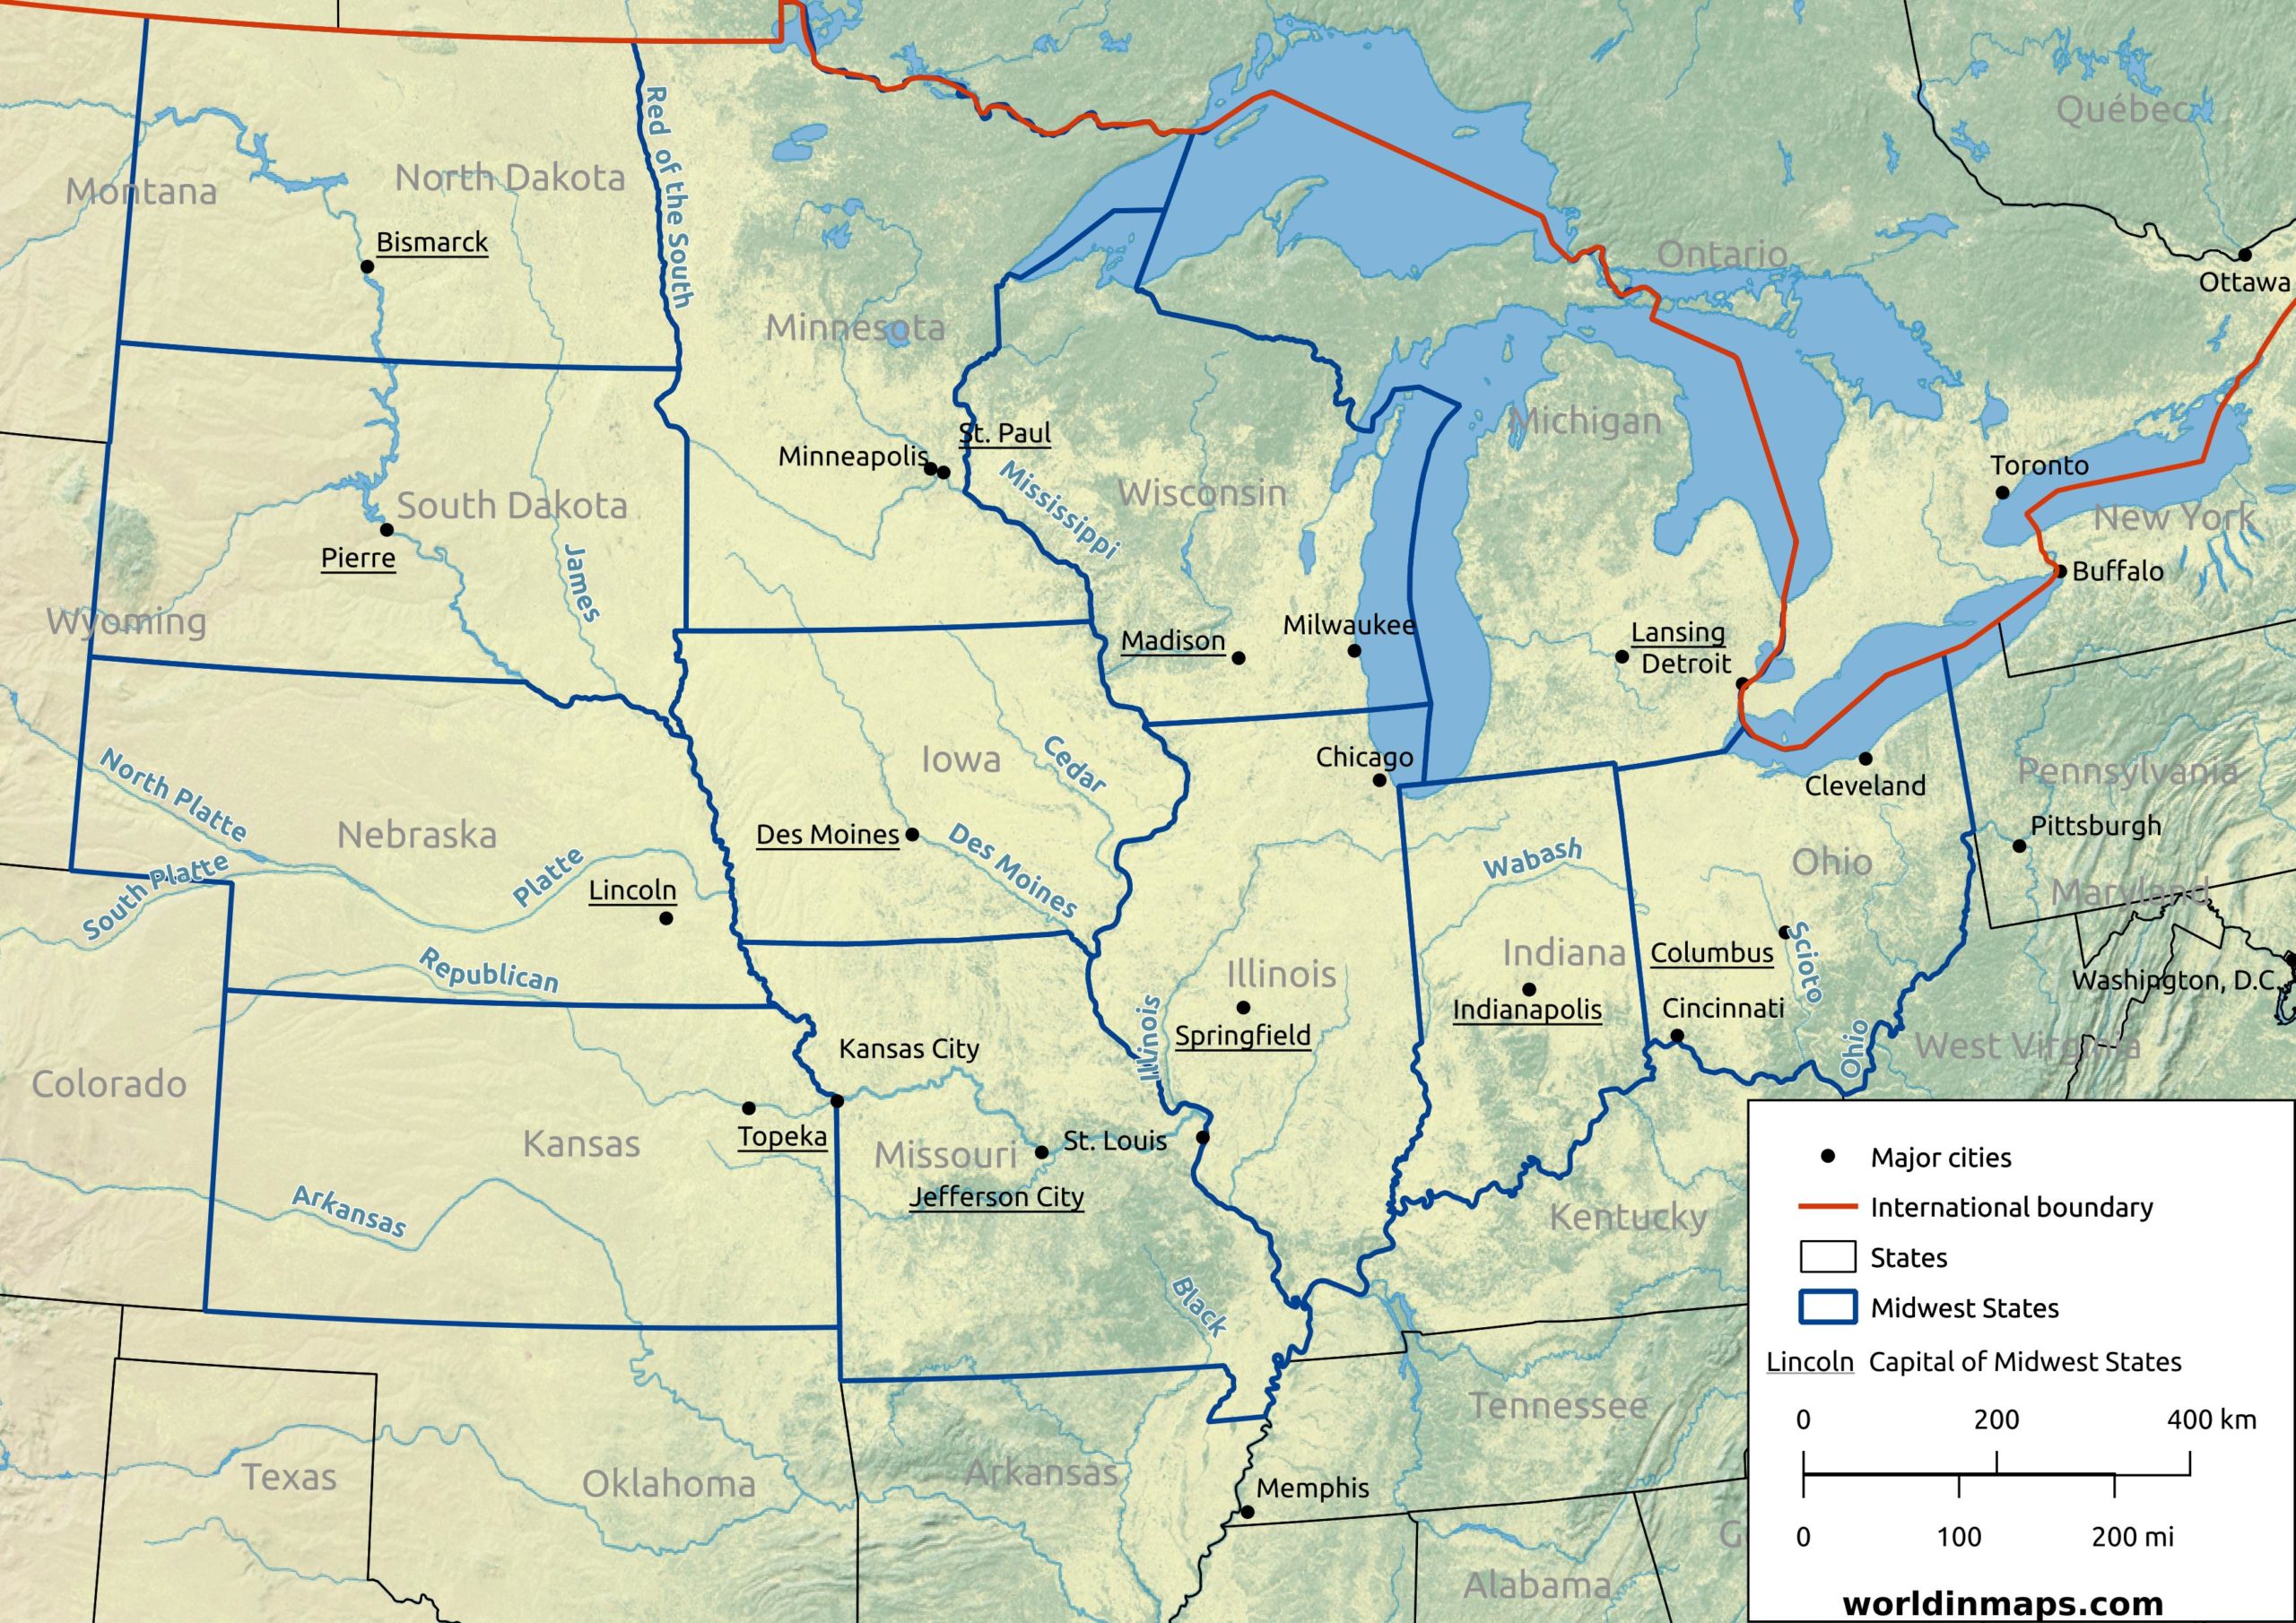 Midwest (Midwestern United States) World in maps